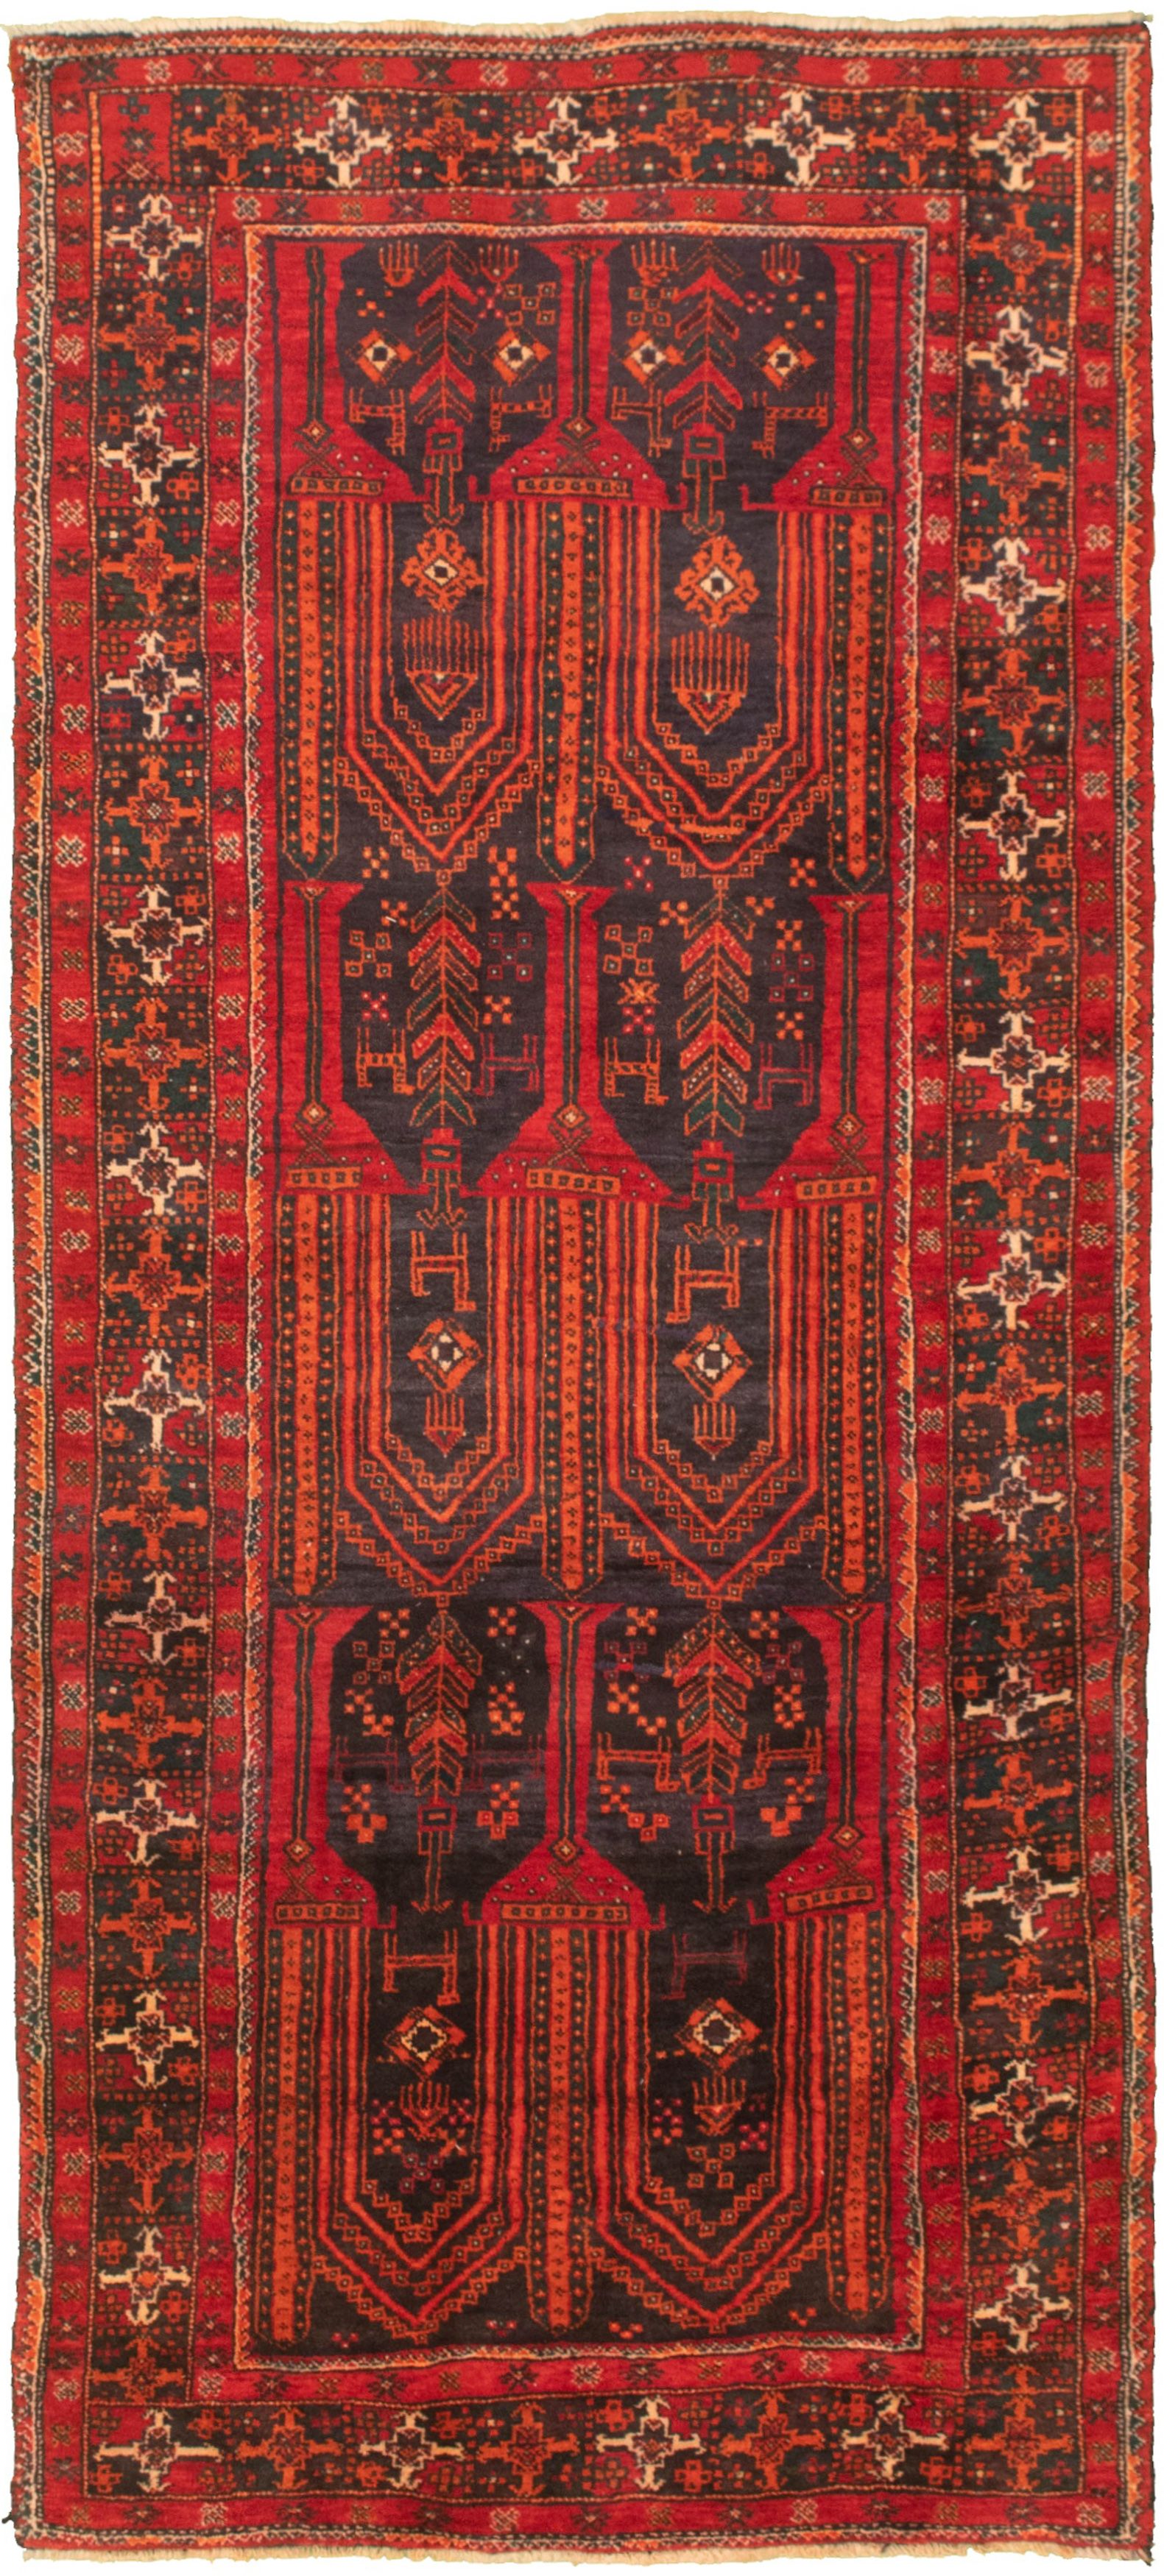 Hand-knotted Authentic Turkish Red Wool Rug 3'11" x 9'4" Size: 3'11" x 9'4"  